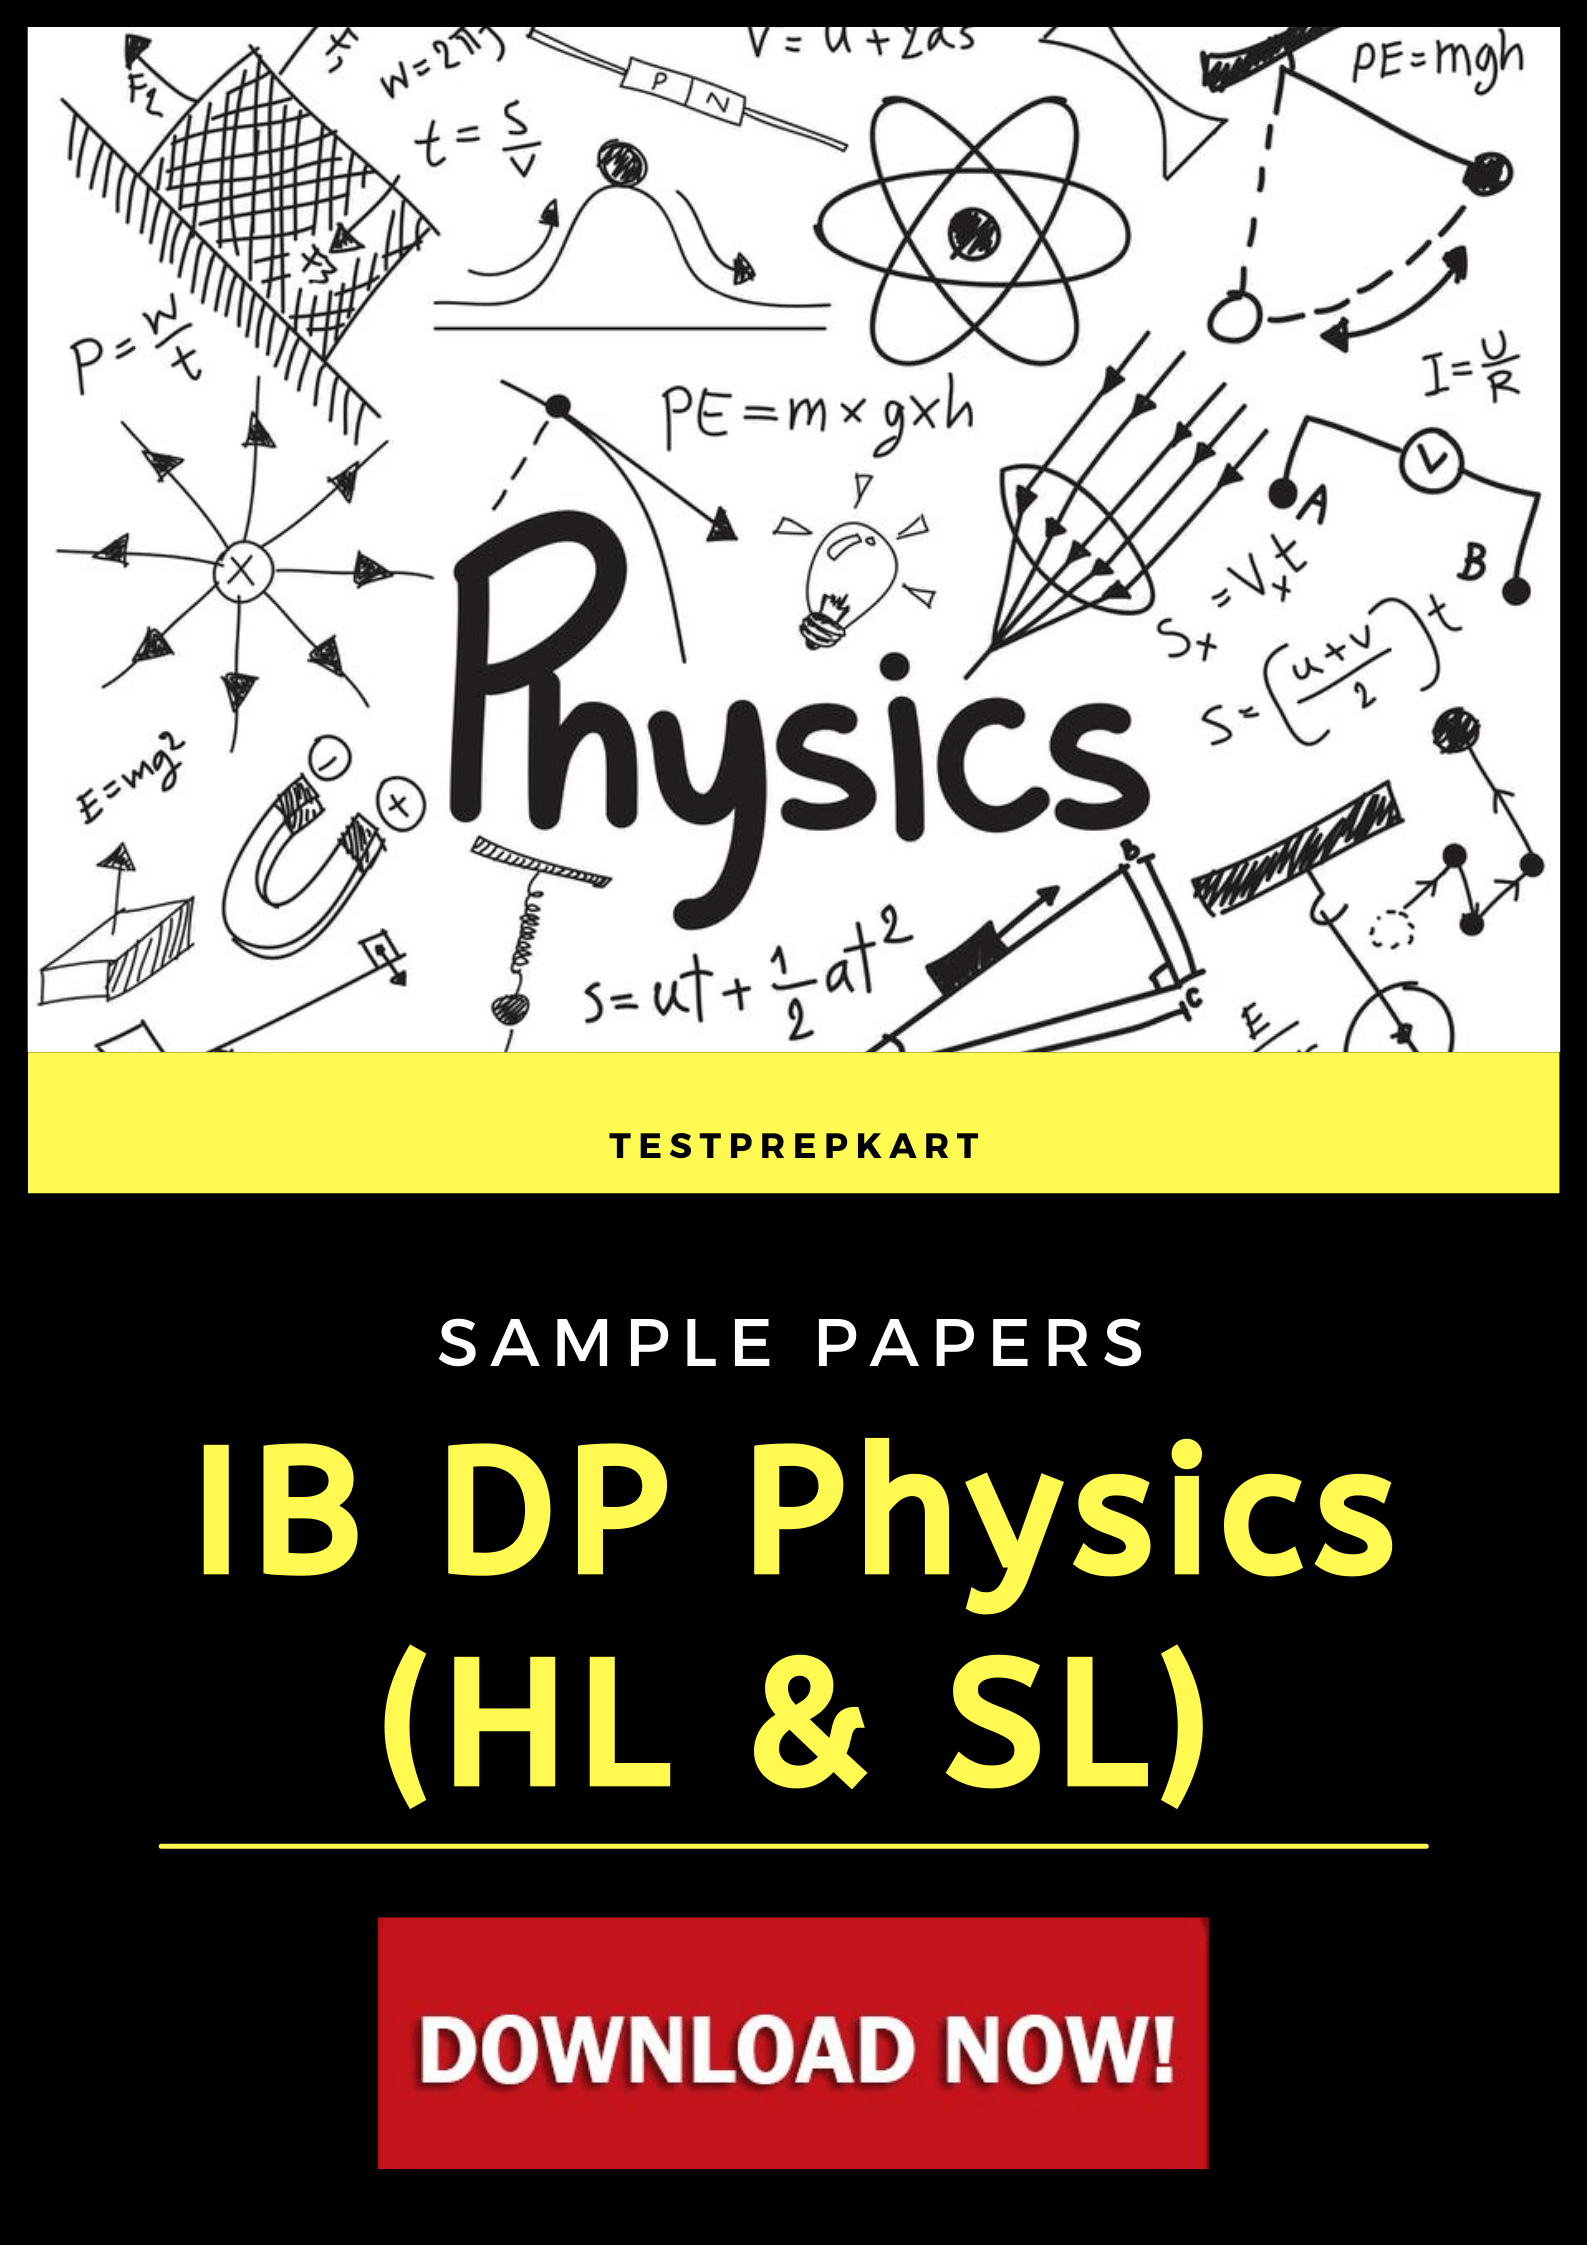  Download IB Physics Sample Papers